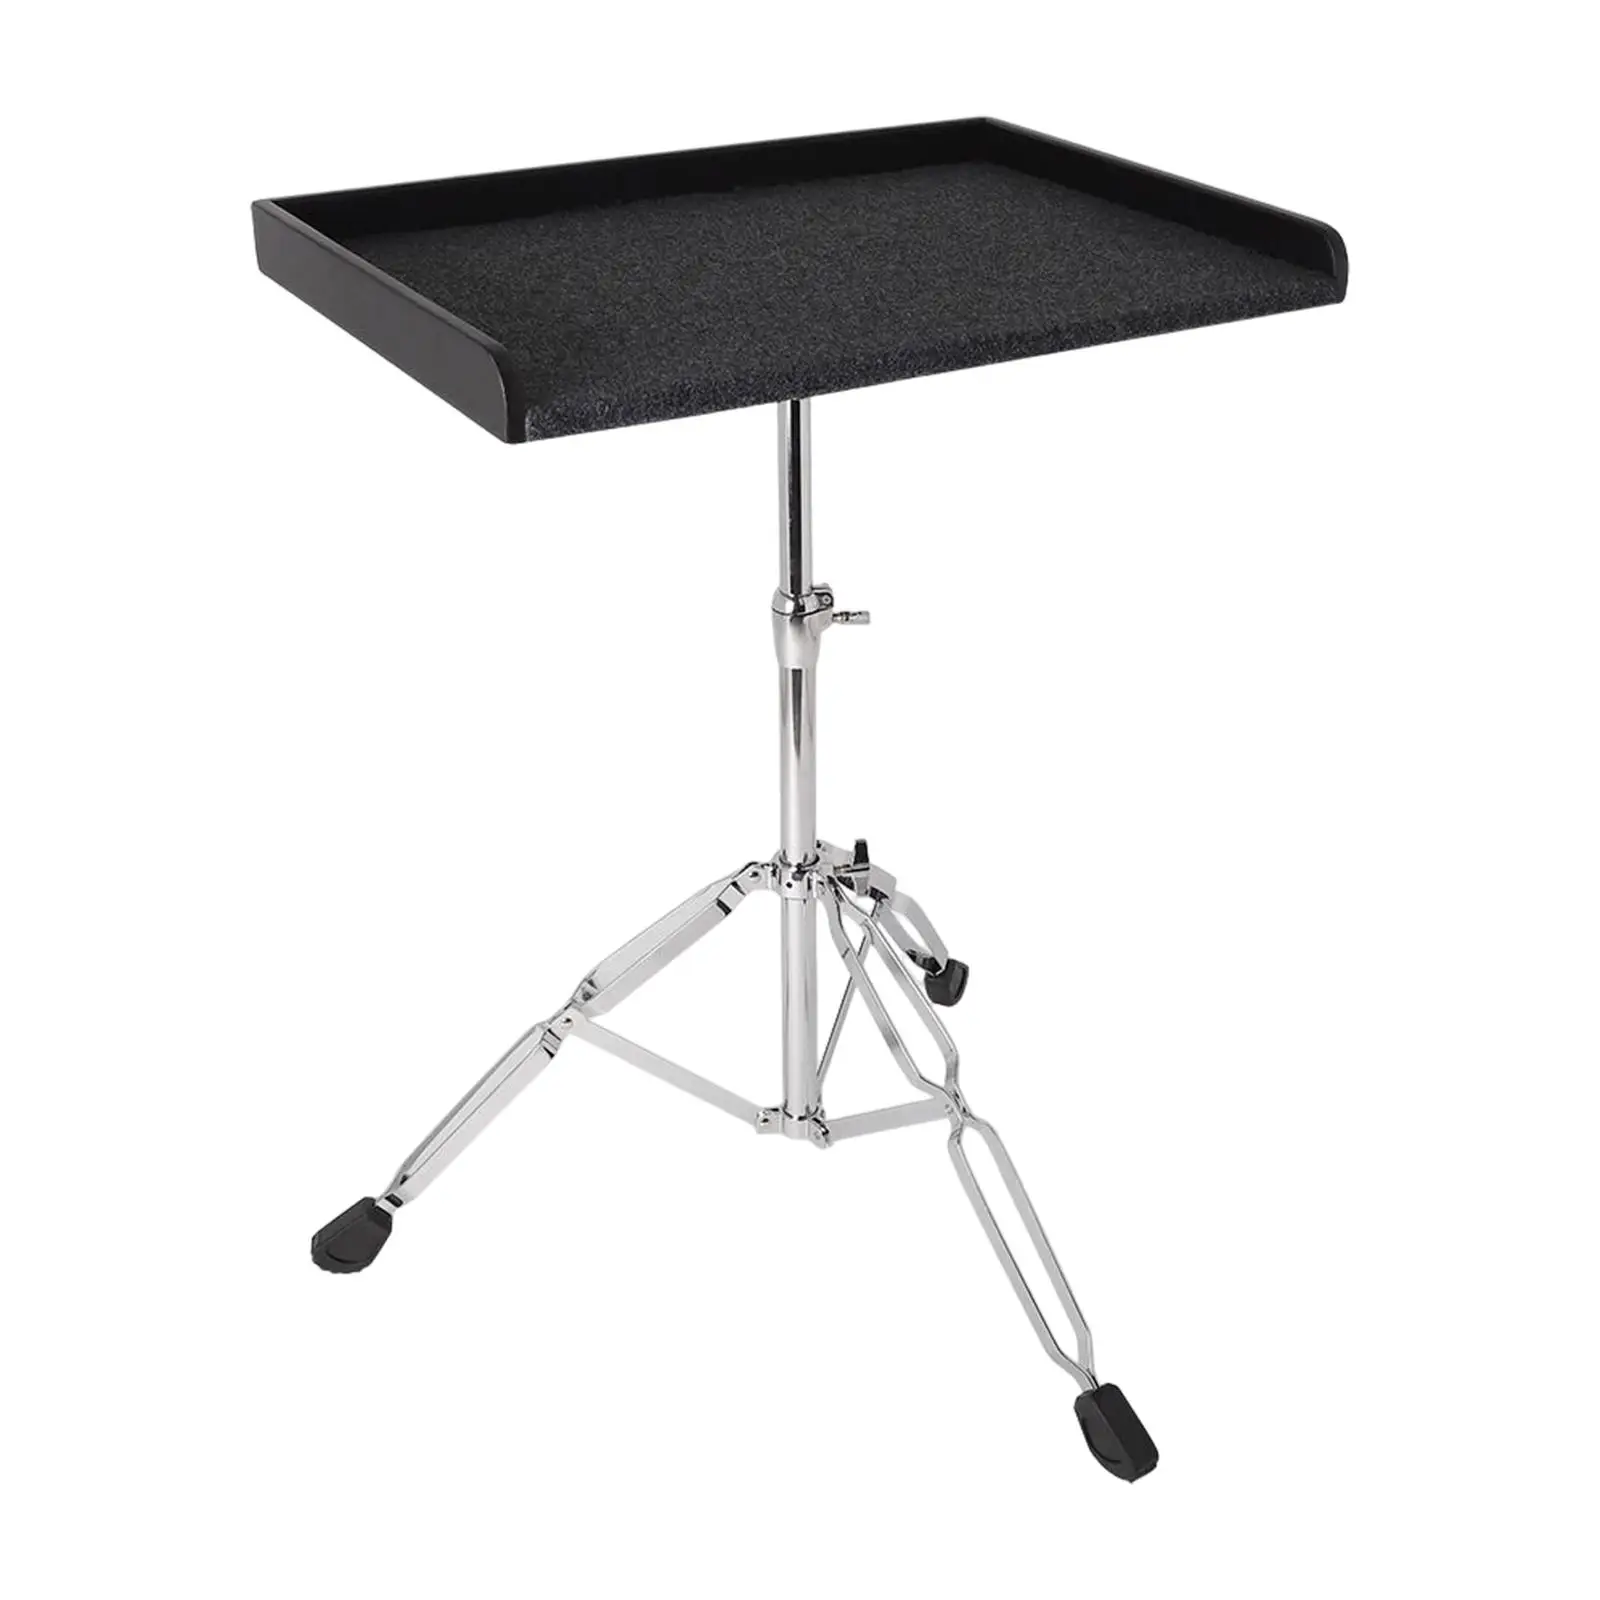 Percussion Table DJ Laptop Drum Percussion Instrument Tray Adjustable Drum Stool